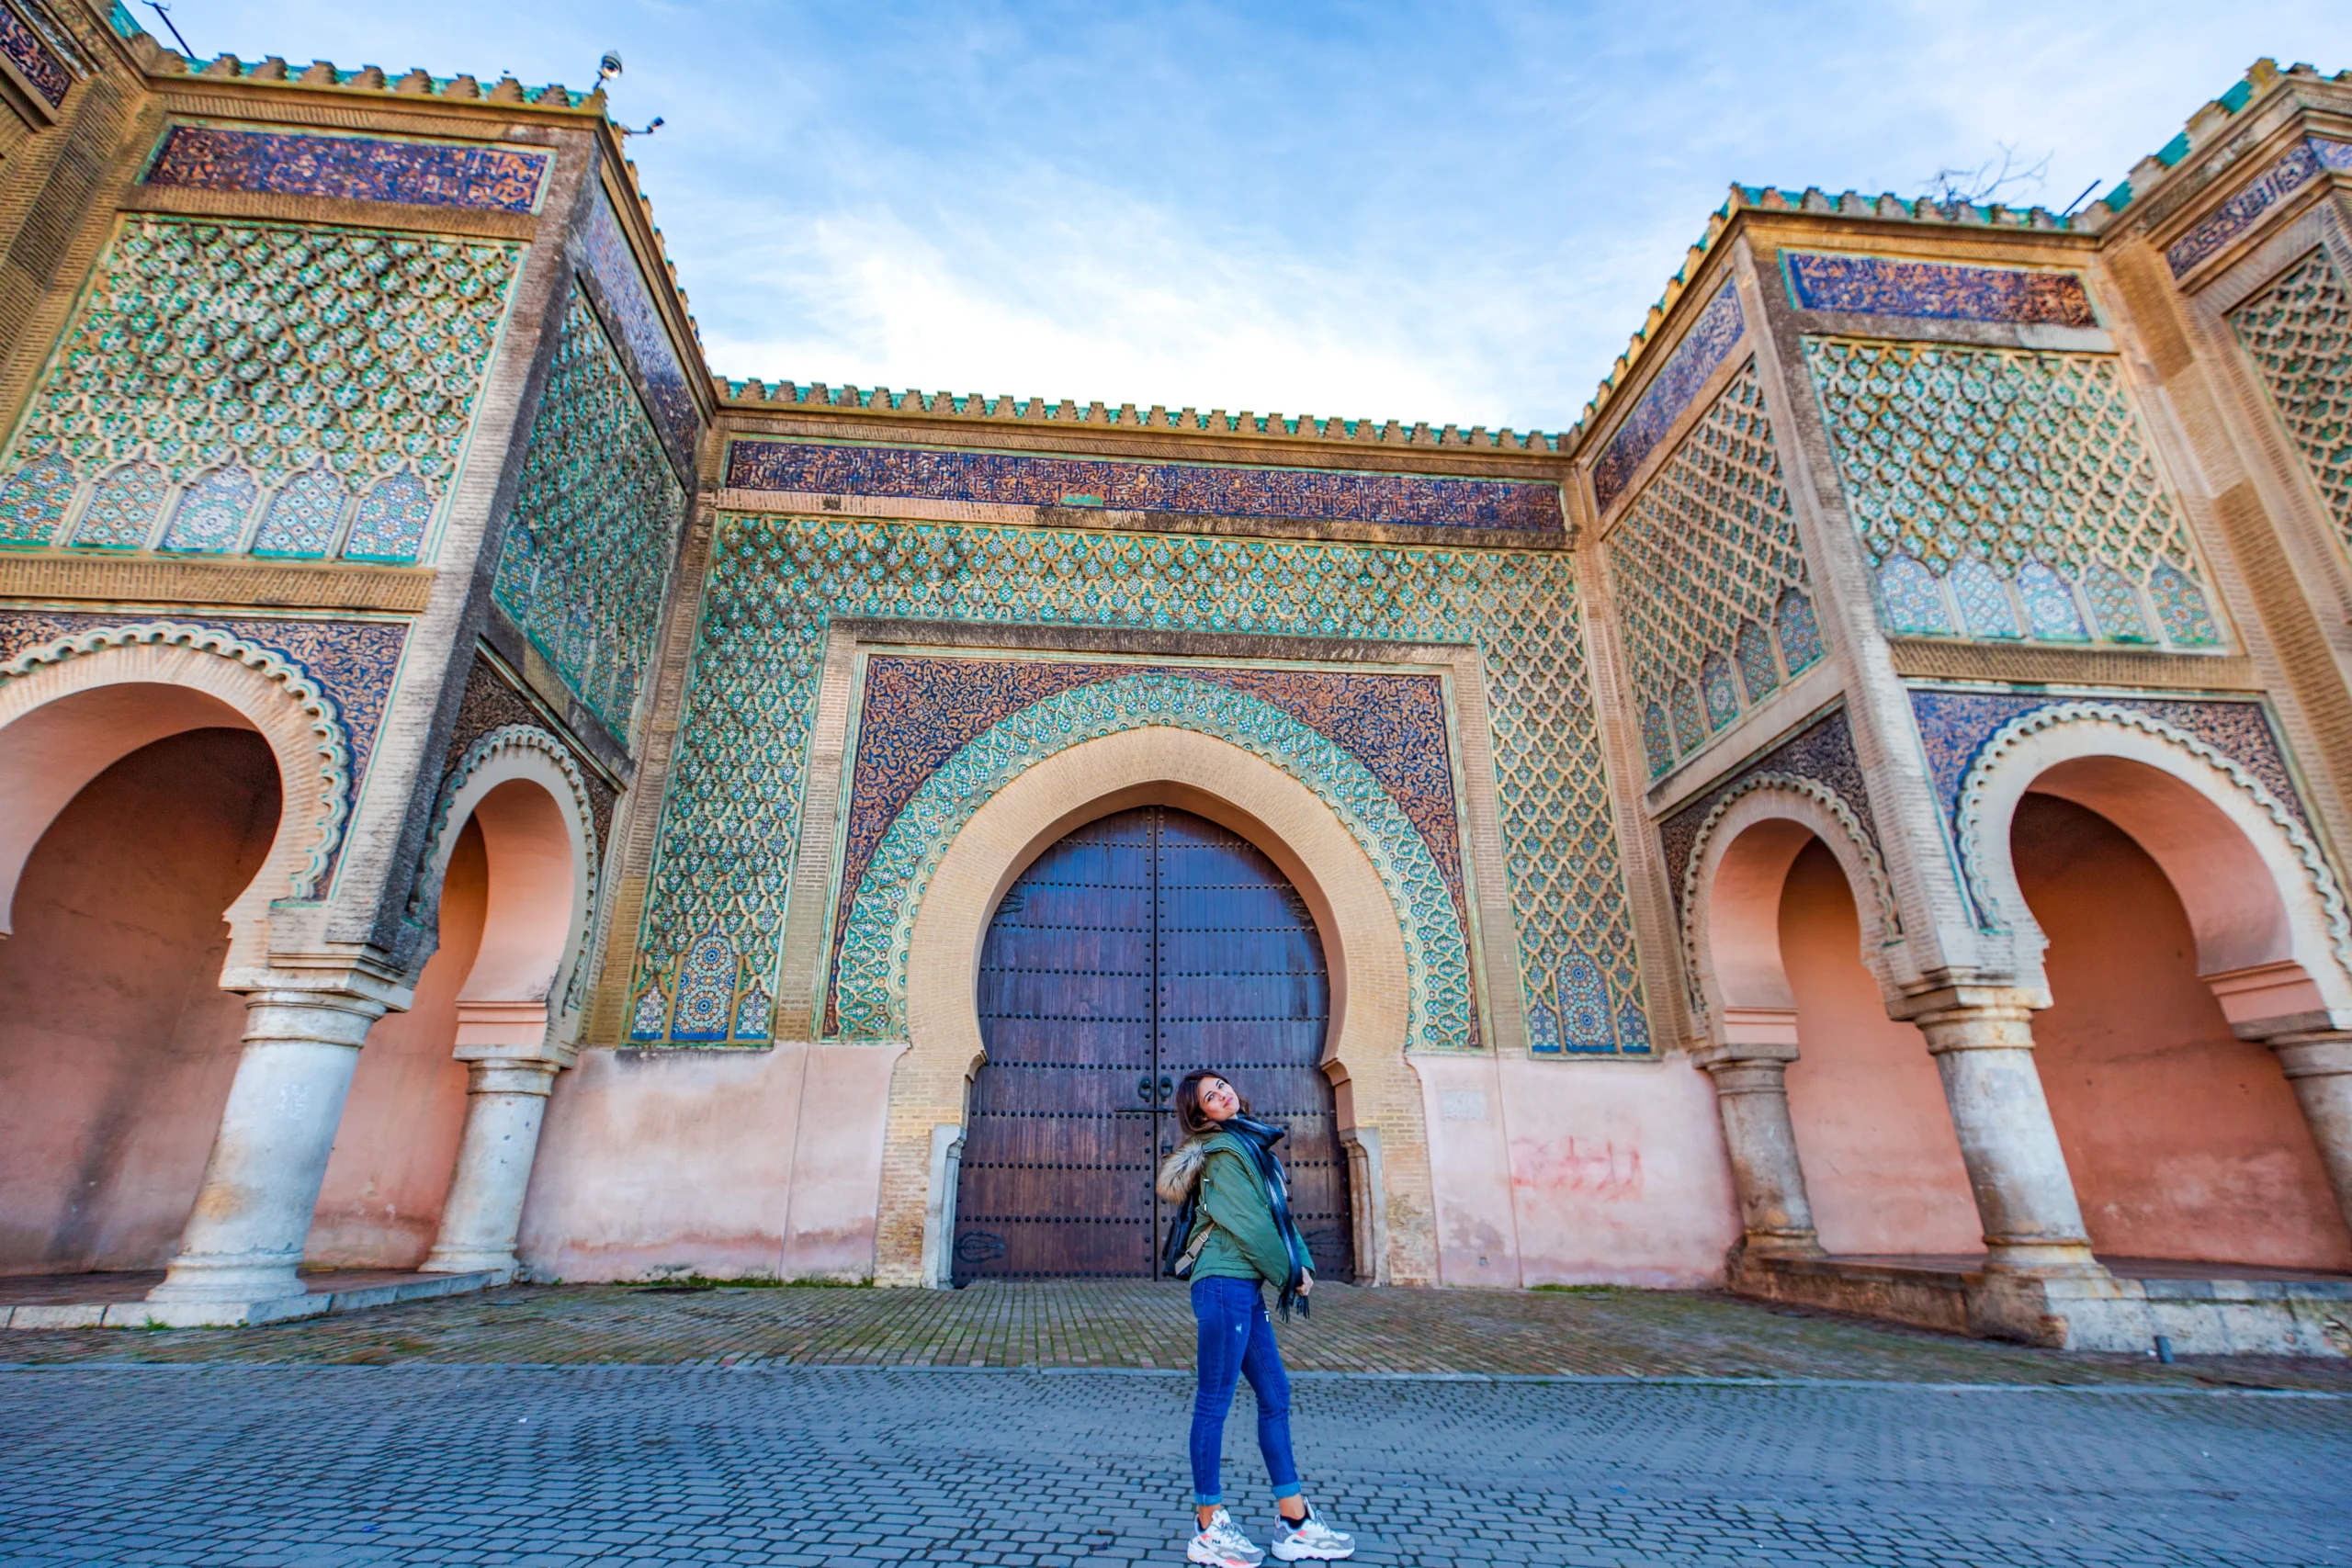 From Medinas to Palaces: Exploring the Imperial Cities of Morocco